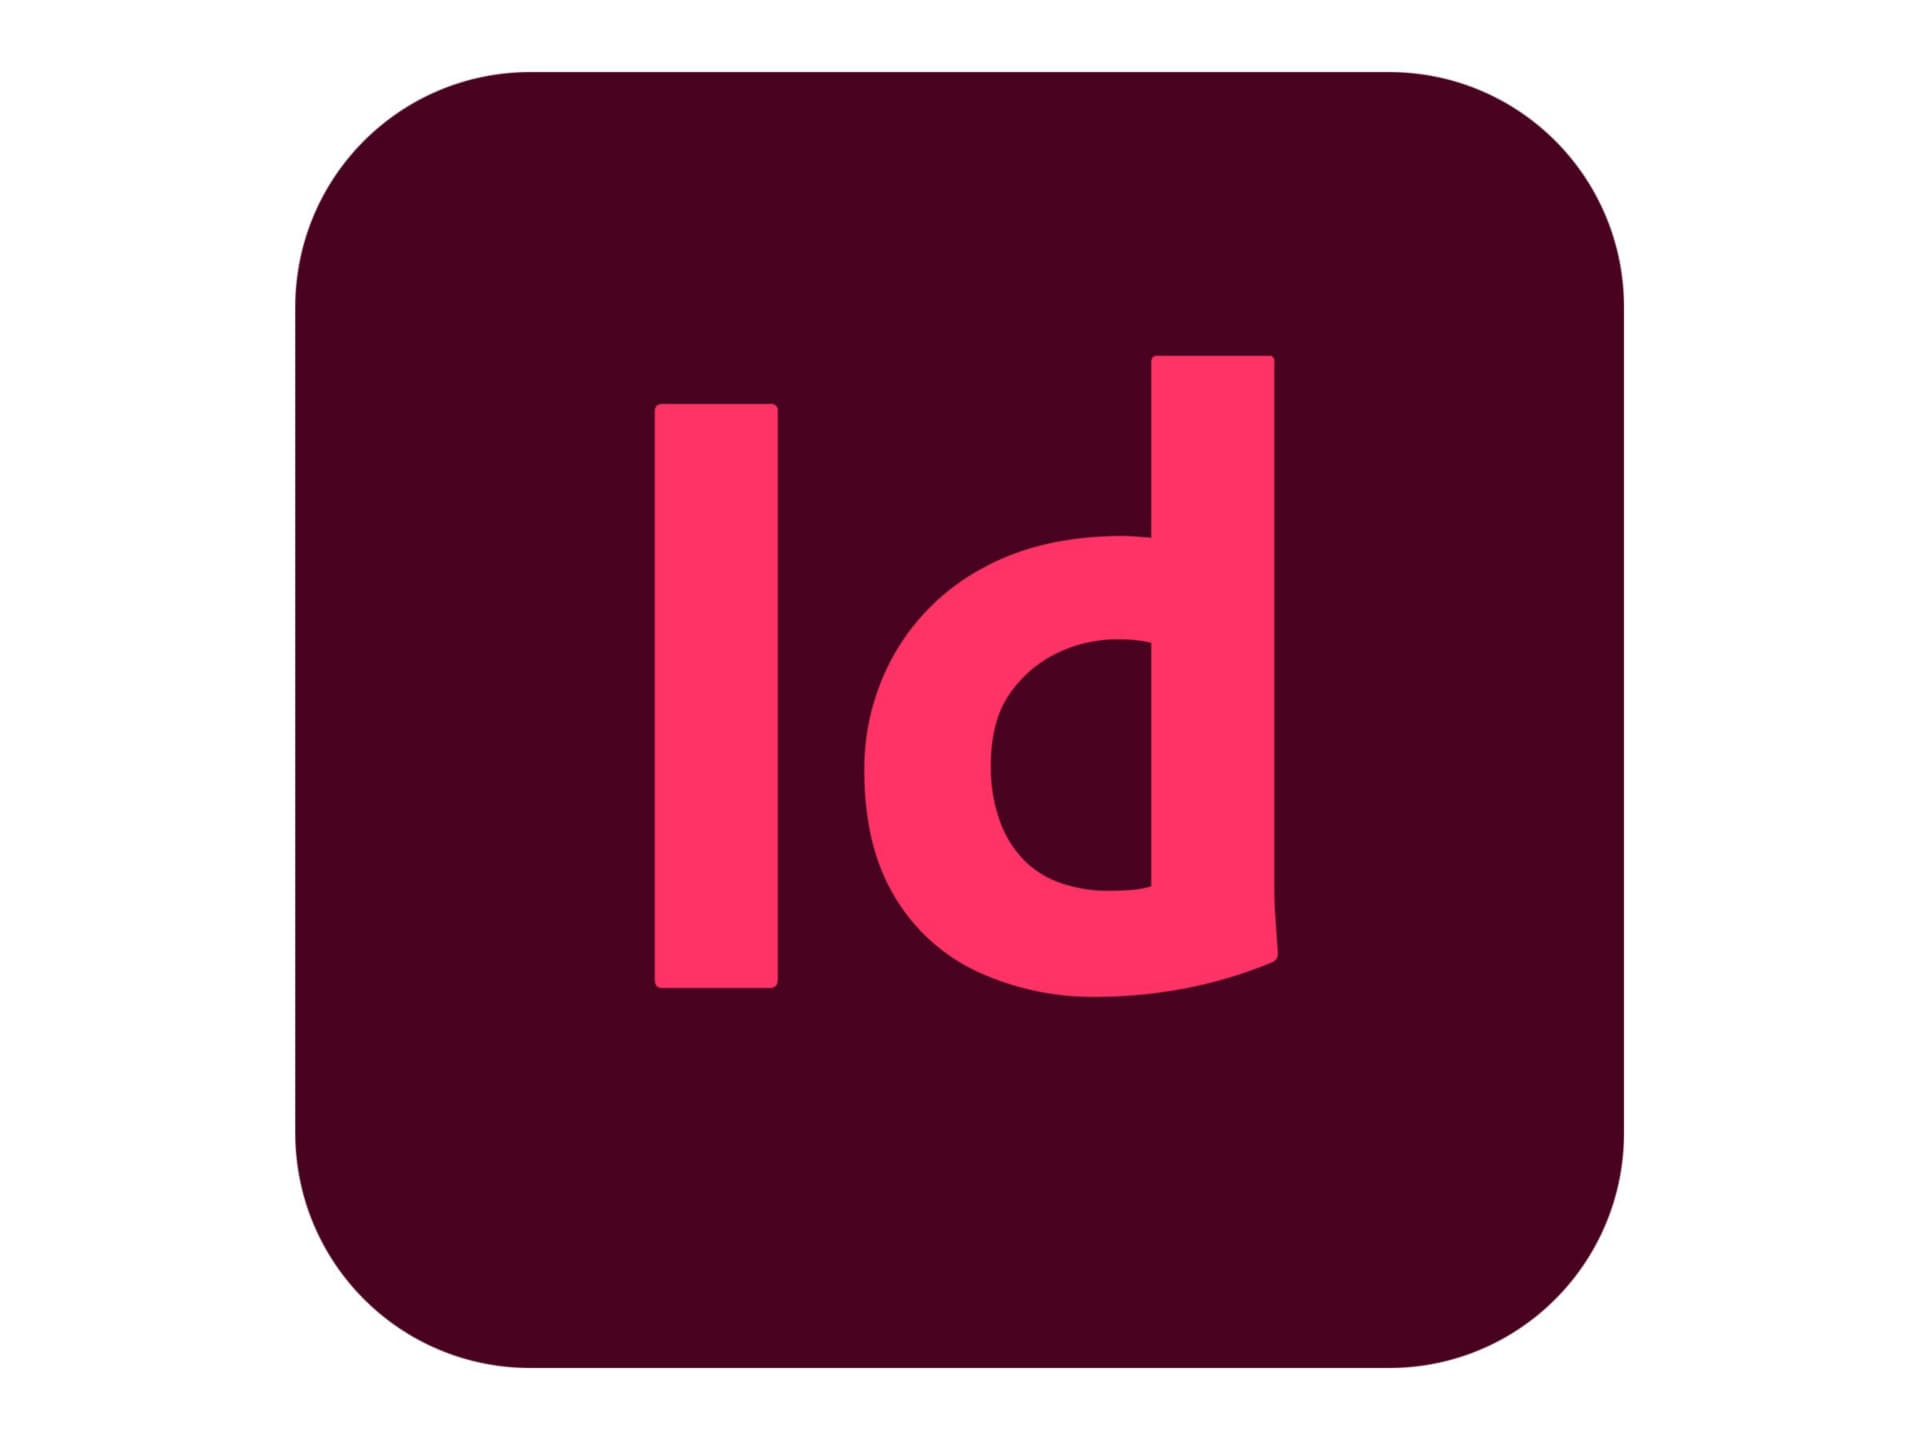 Adobe InDesign CC for teams - Subscription New (7 months) - 1 named user